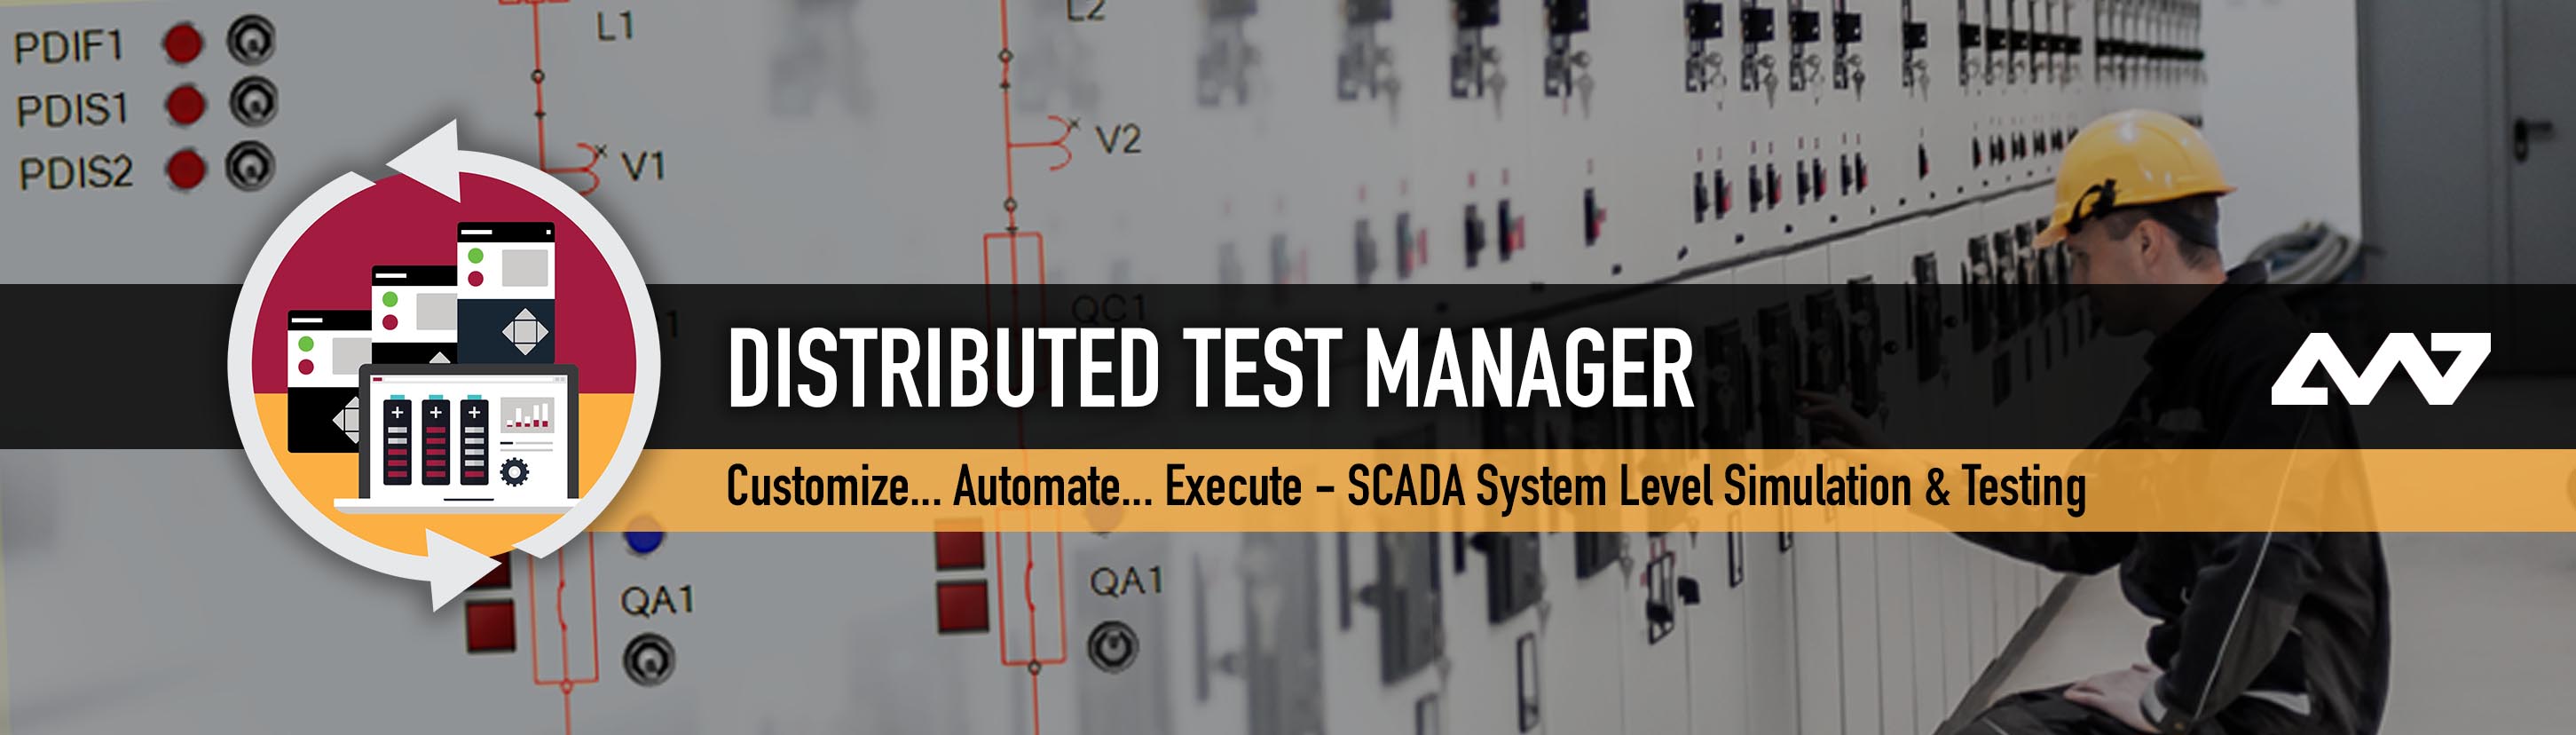 Distributed Test Manager (DTM)